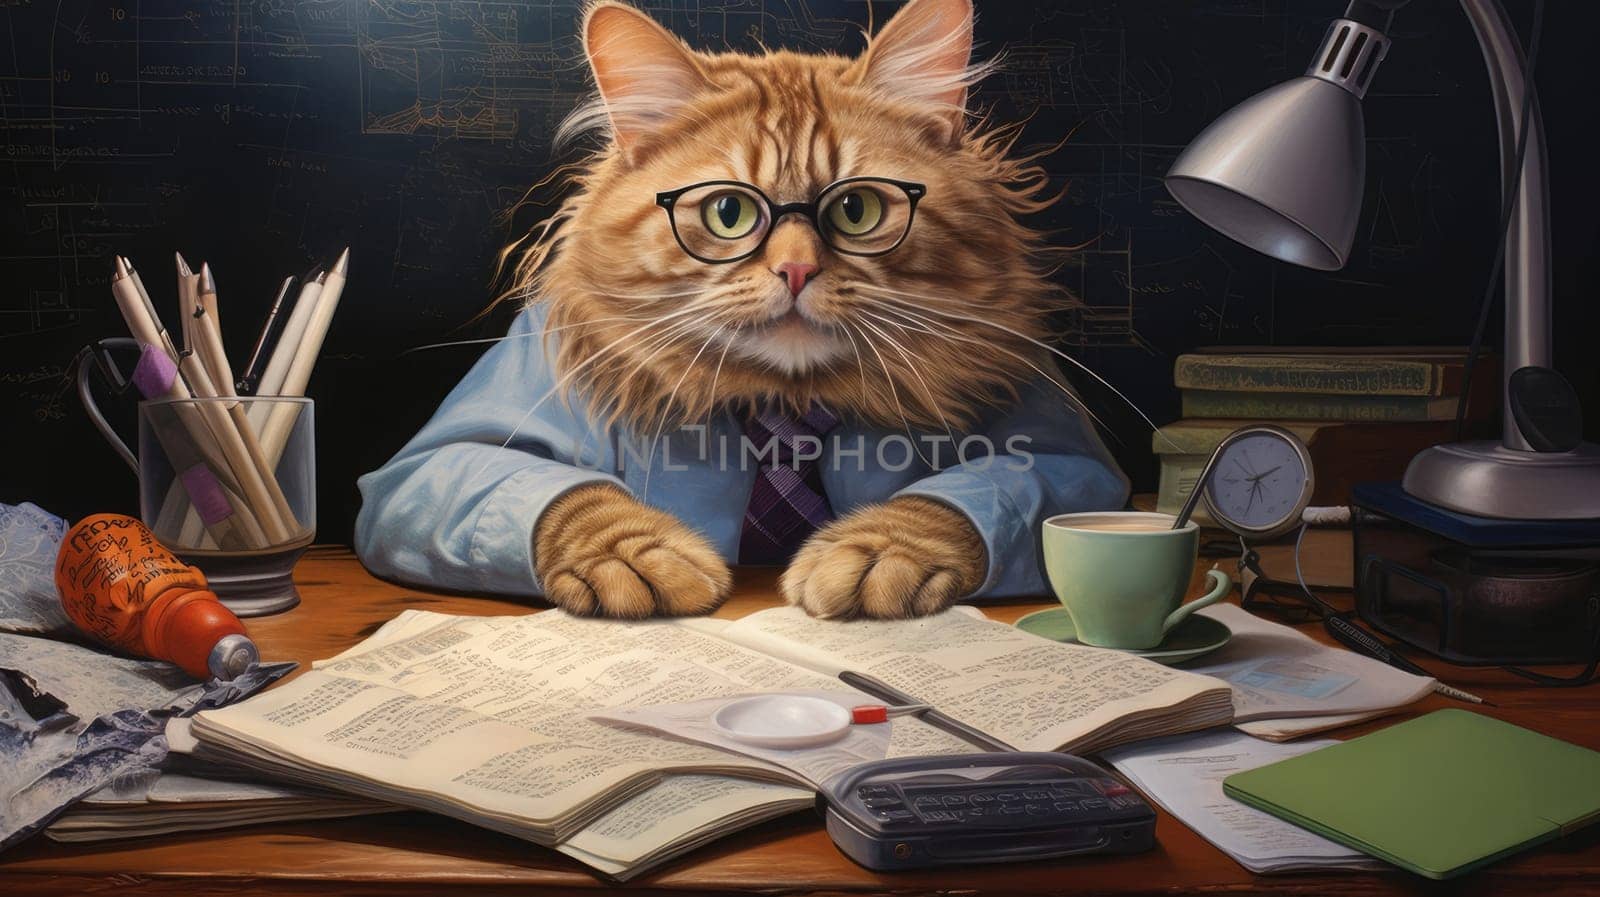 Feline curiosity at work photo realistic illustration - AI generated. Cat, glasses, tie, table, paper.